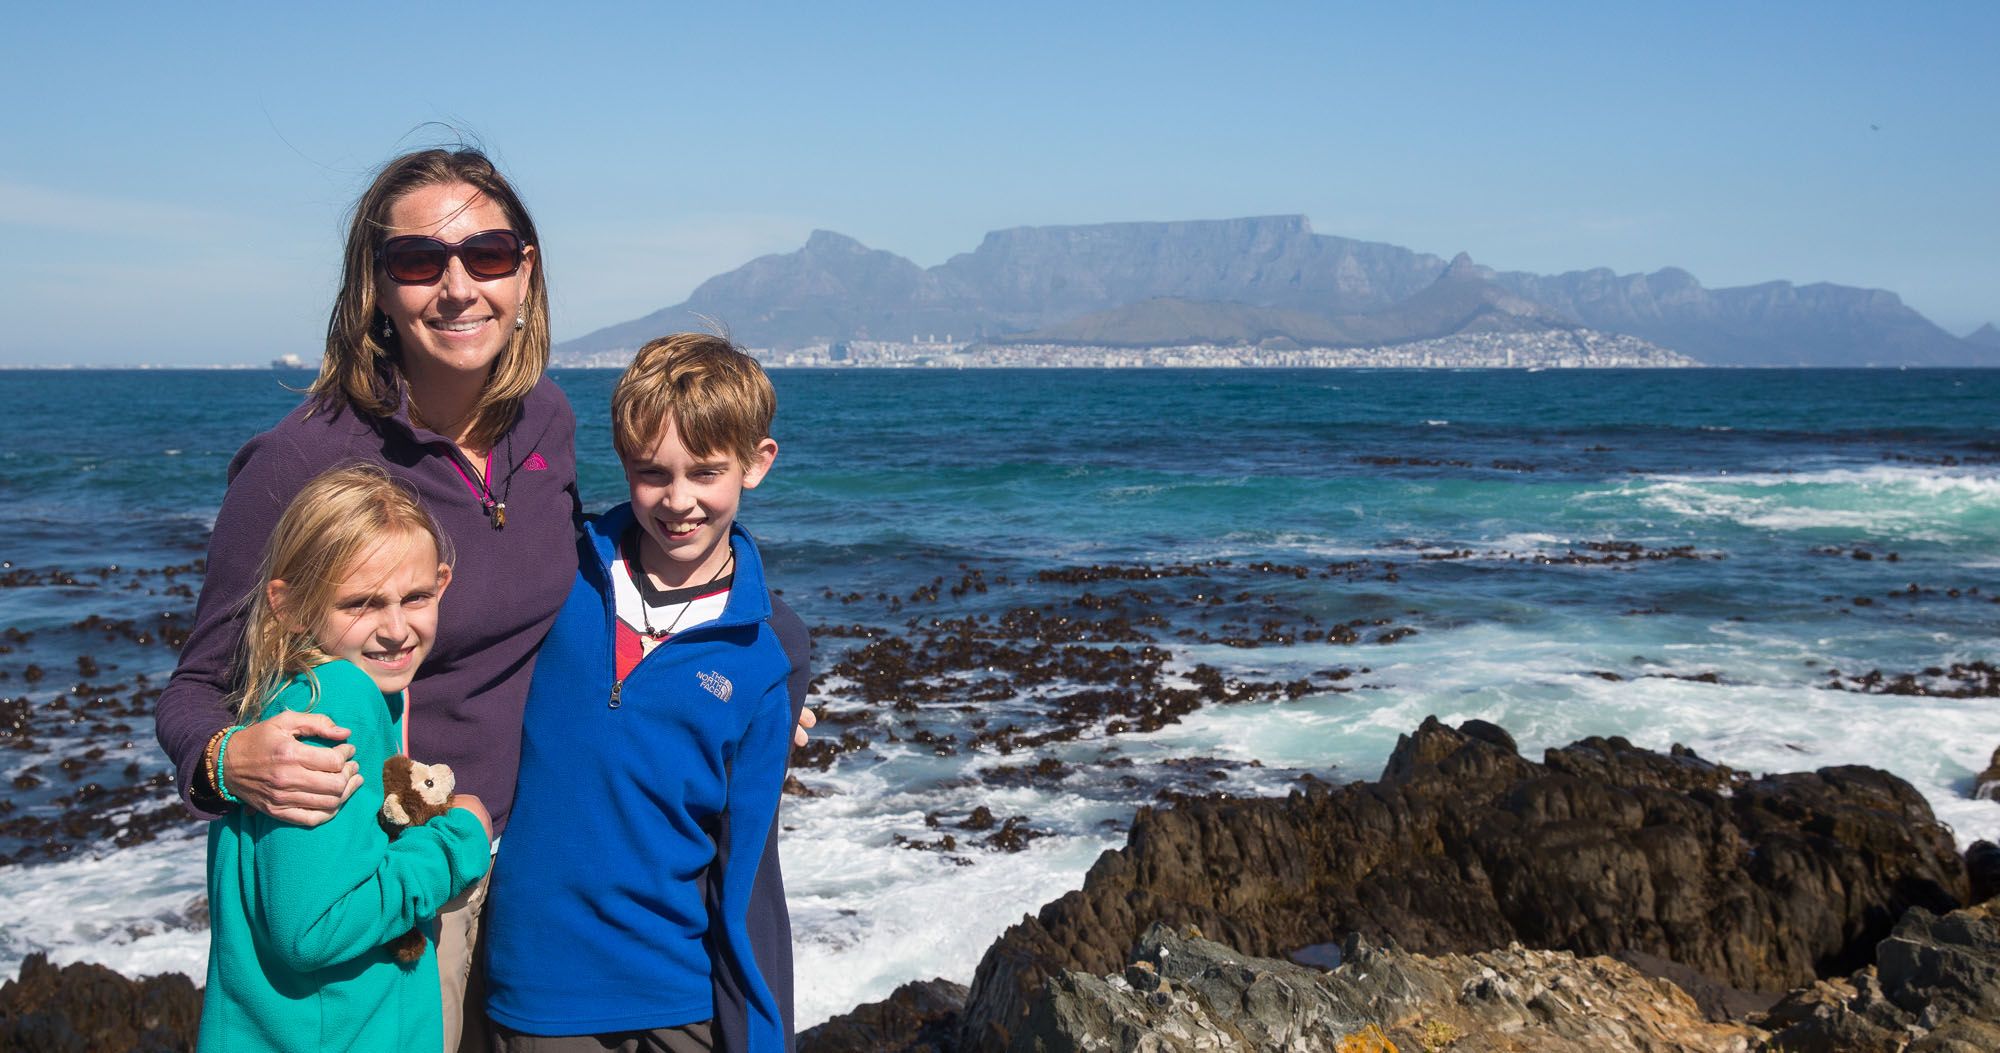 Featured image for “5 Days in Cape Town with Kids”